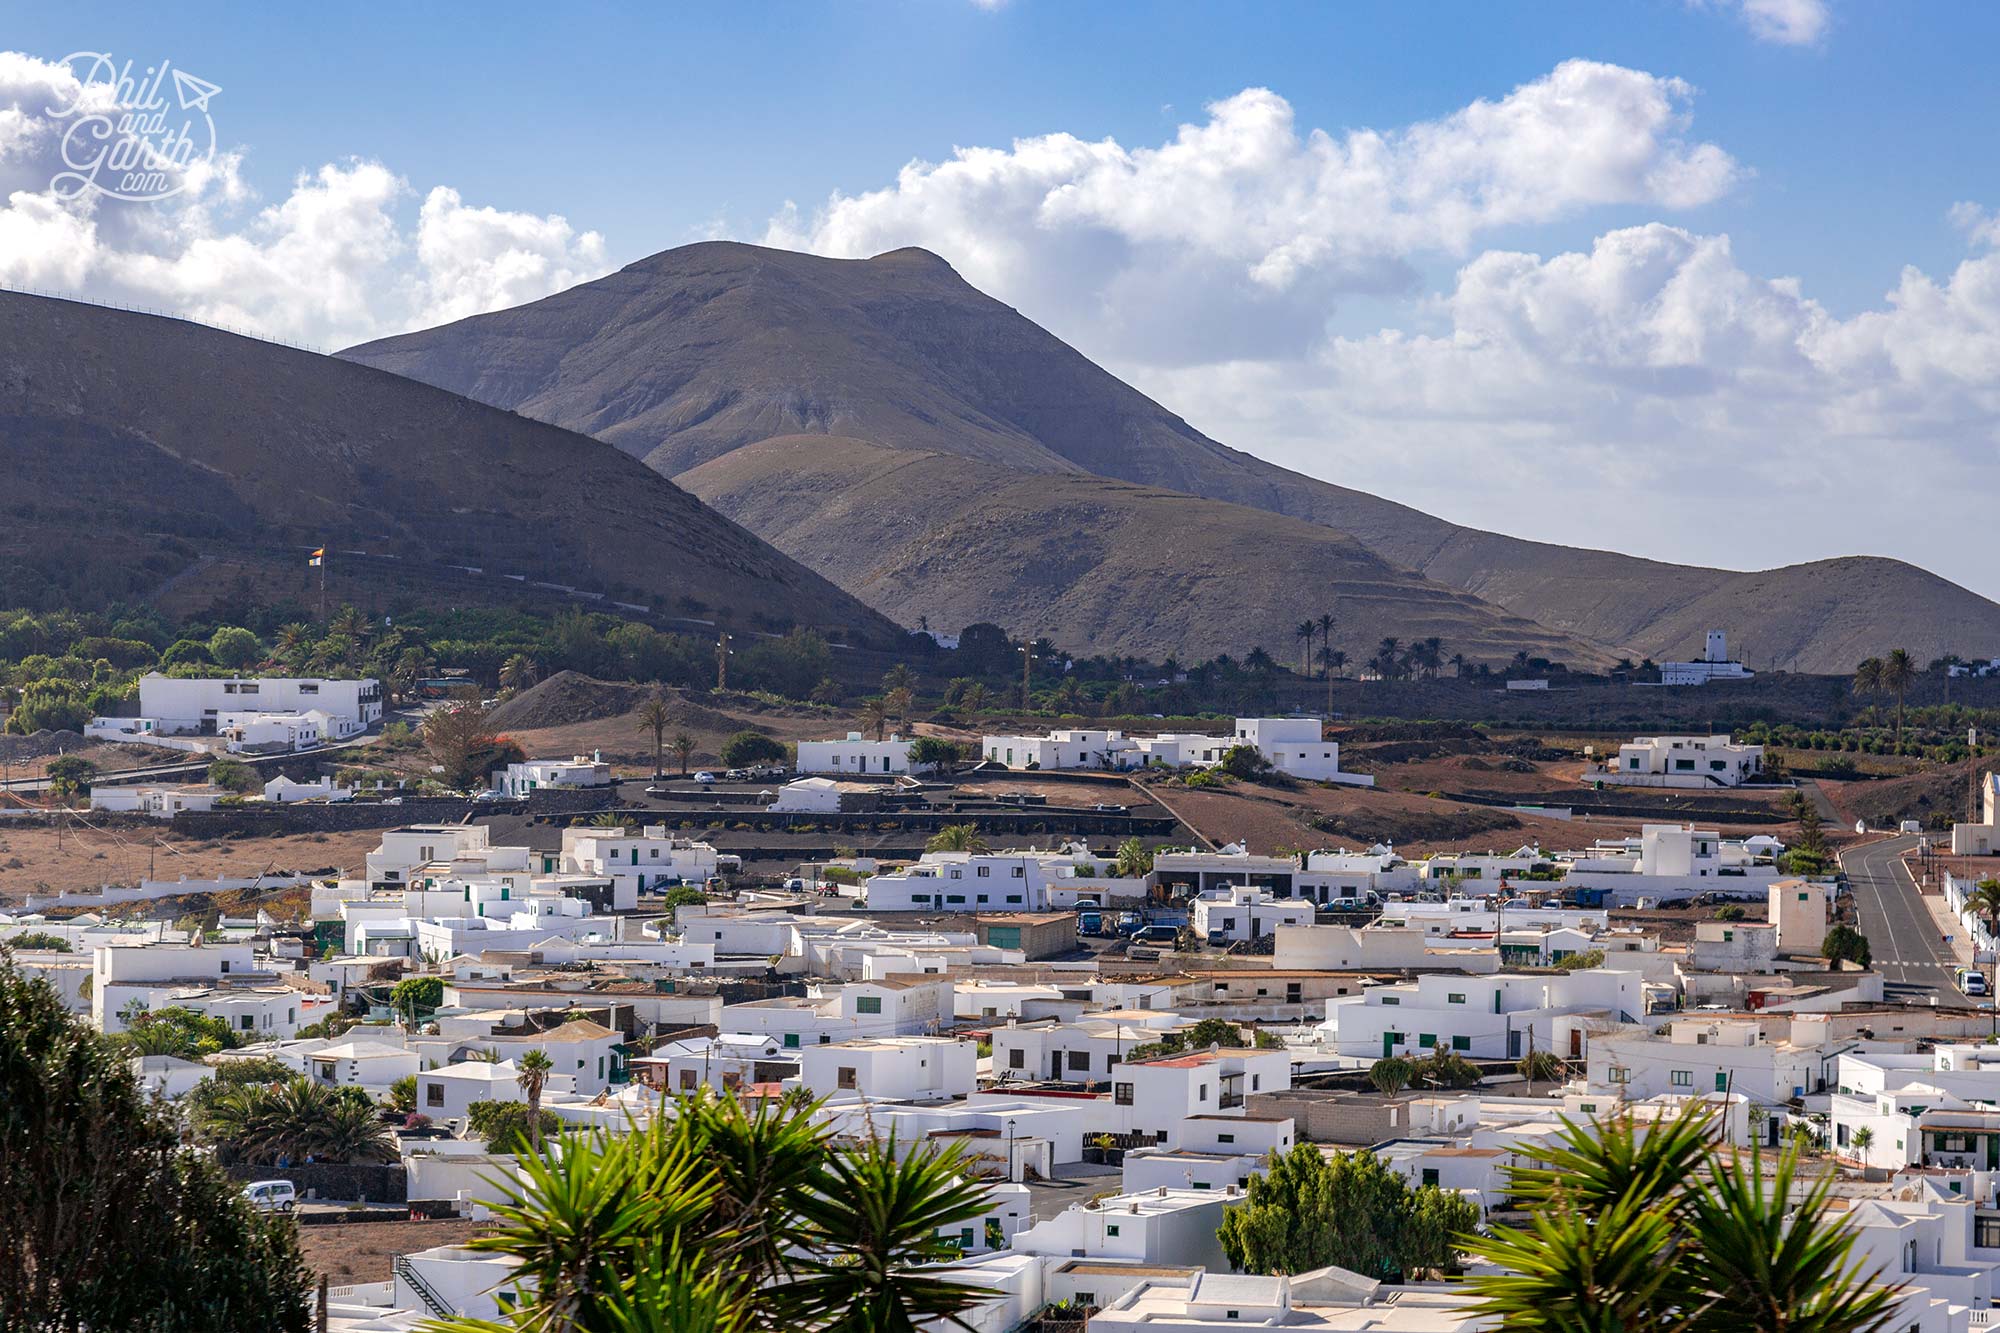 Typical single storey white-washed homes in Lanzarote